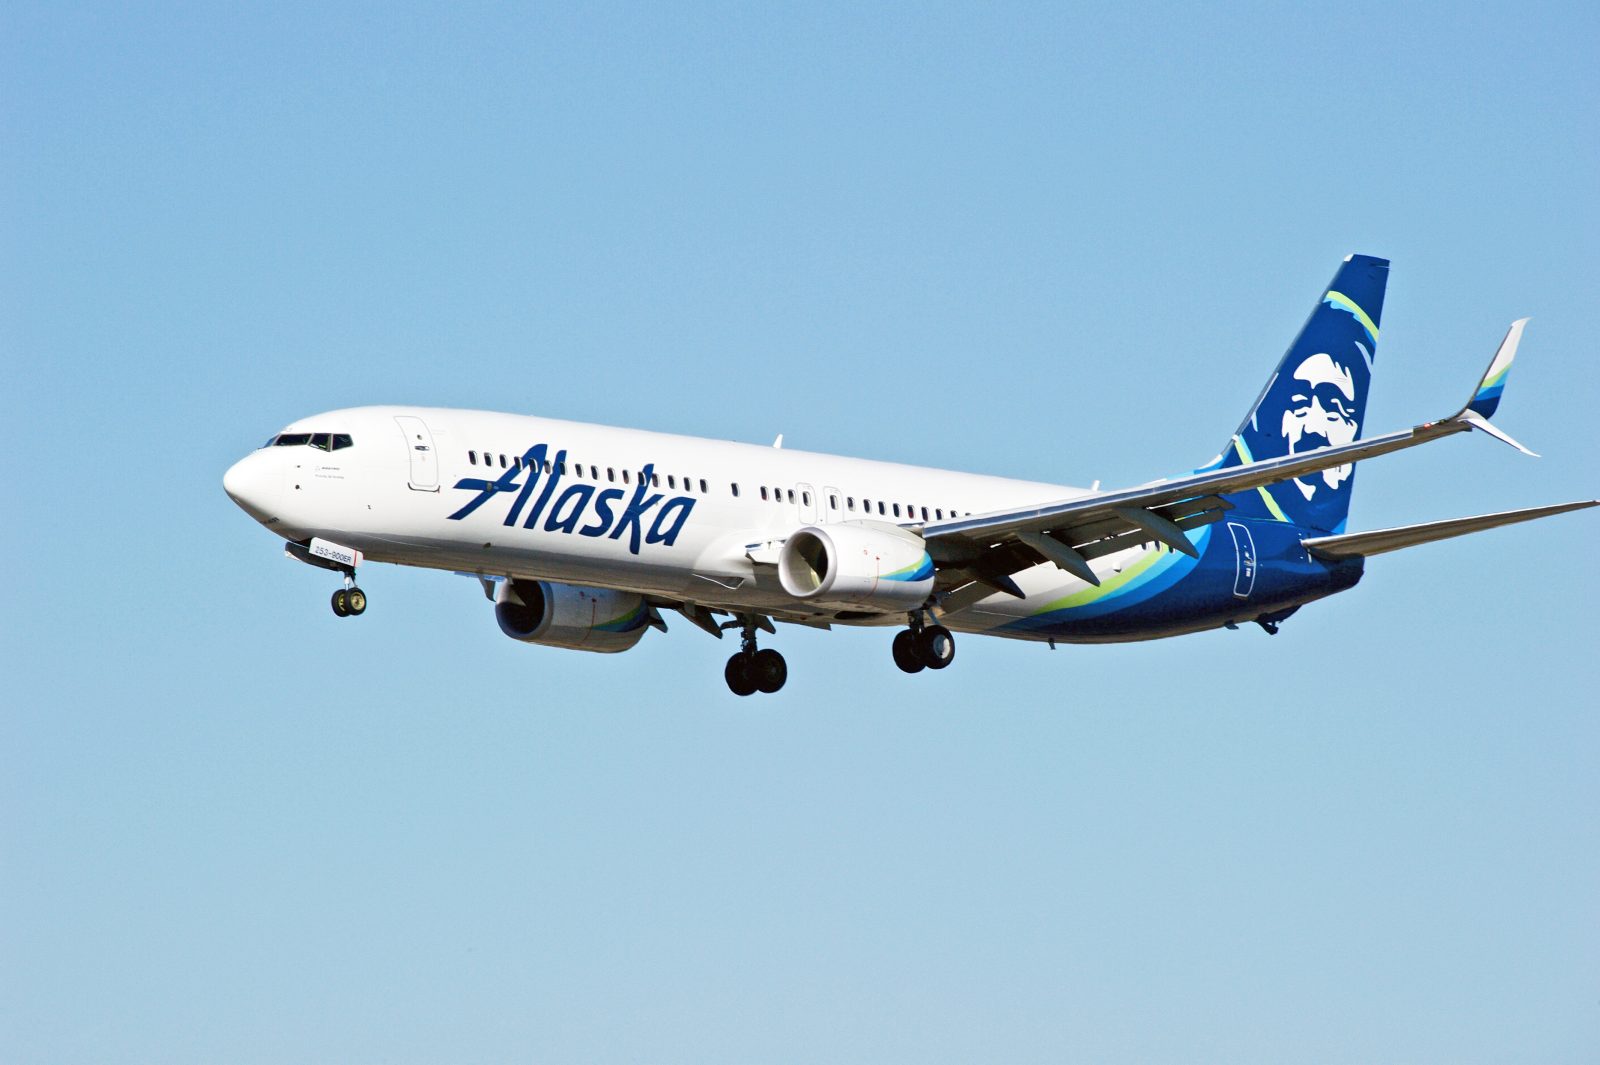 An Alaska Airlines 737 aircraft comes into land